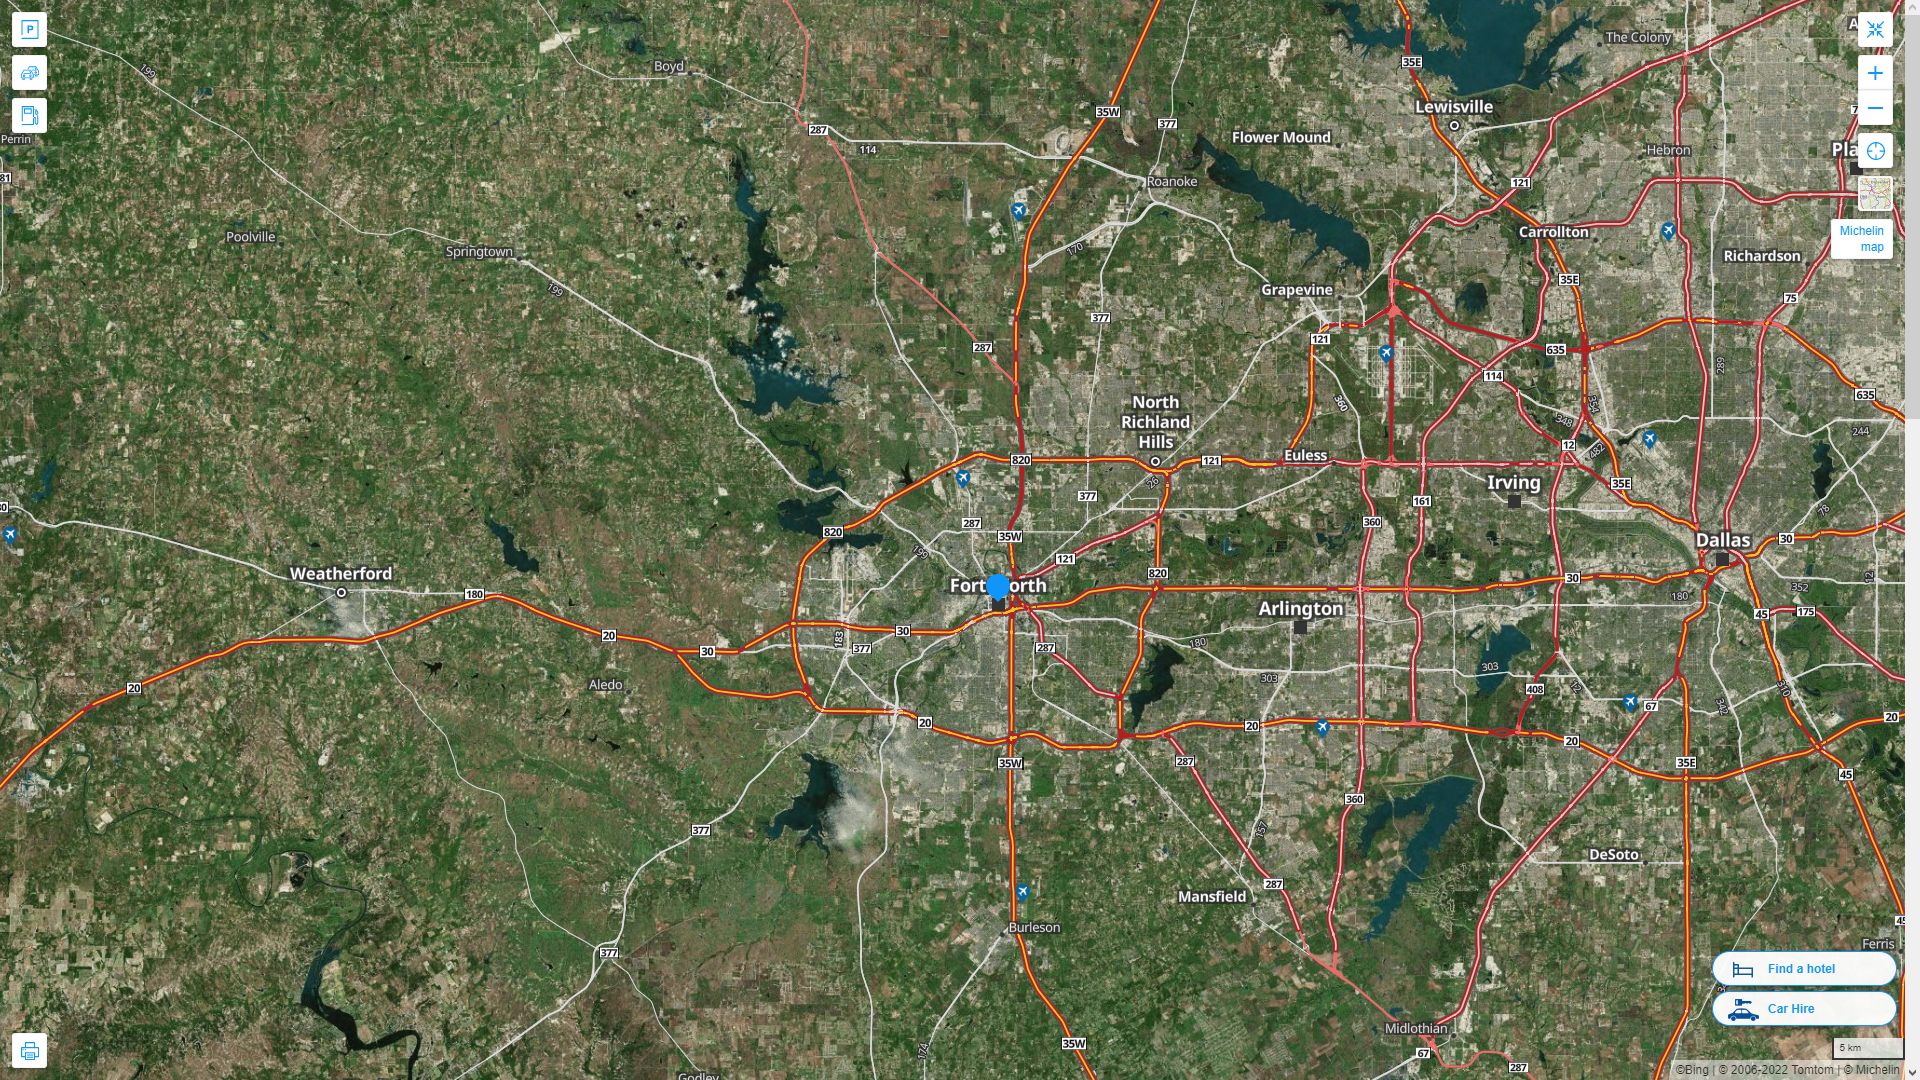 Fort Worth Texas Highway and Road Map with Satellite View